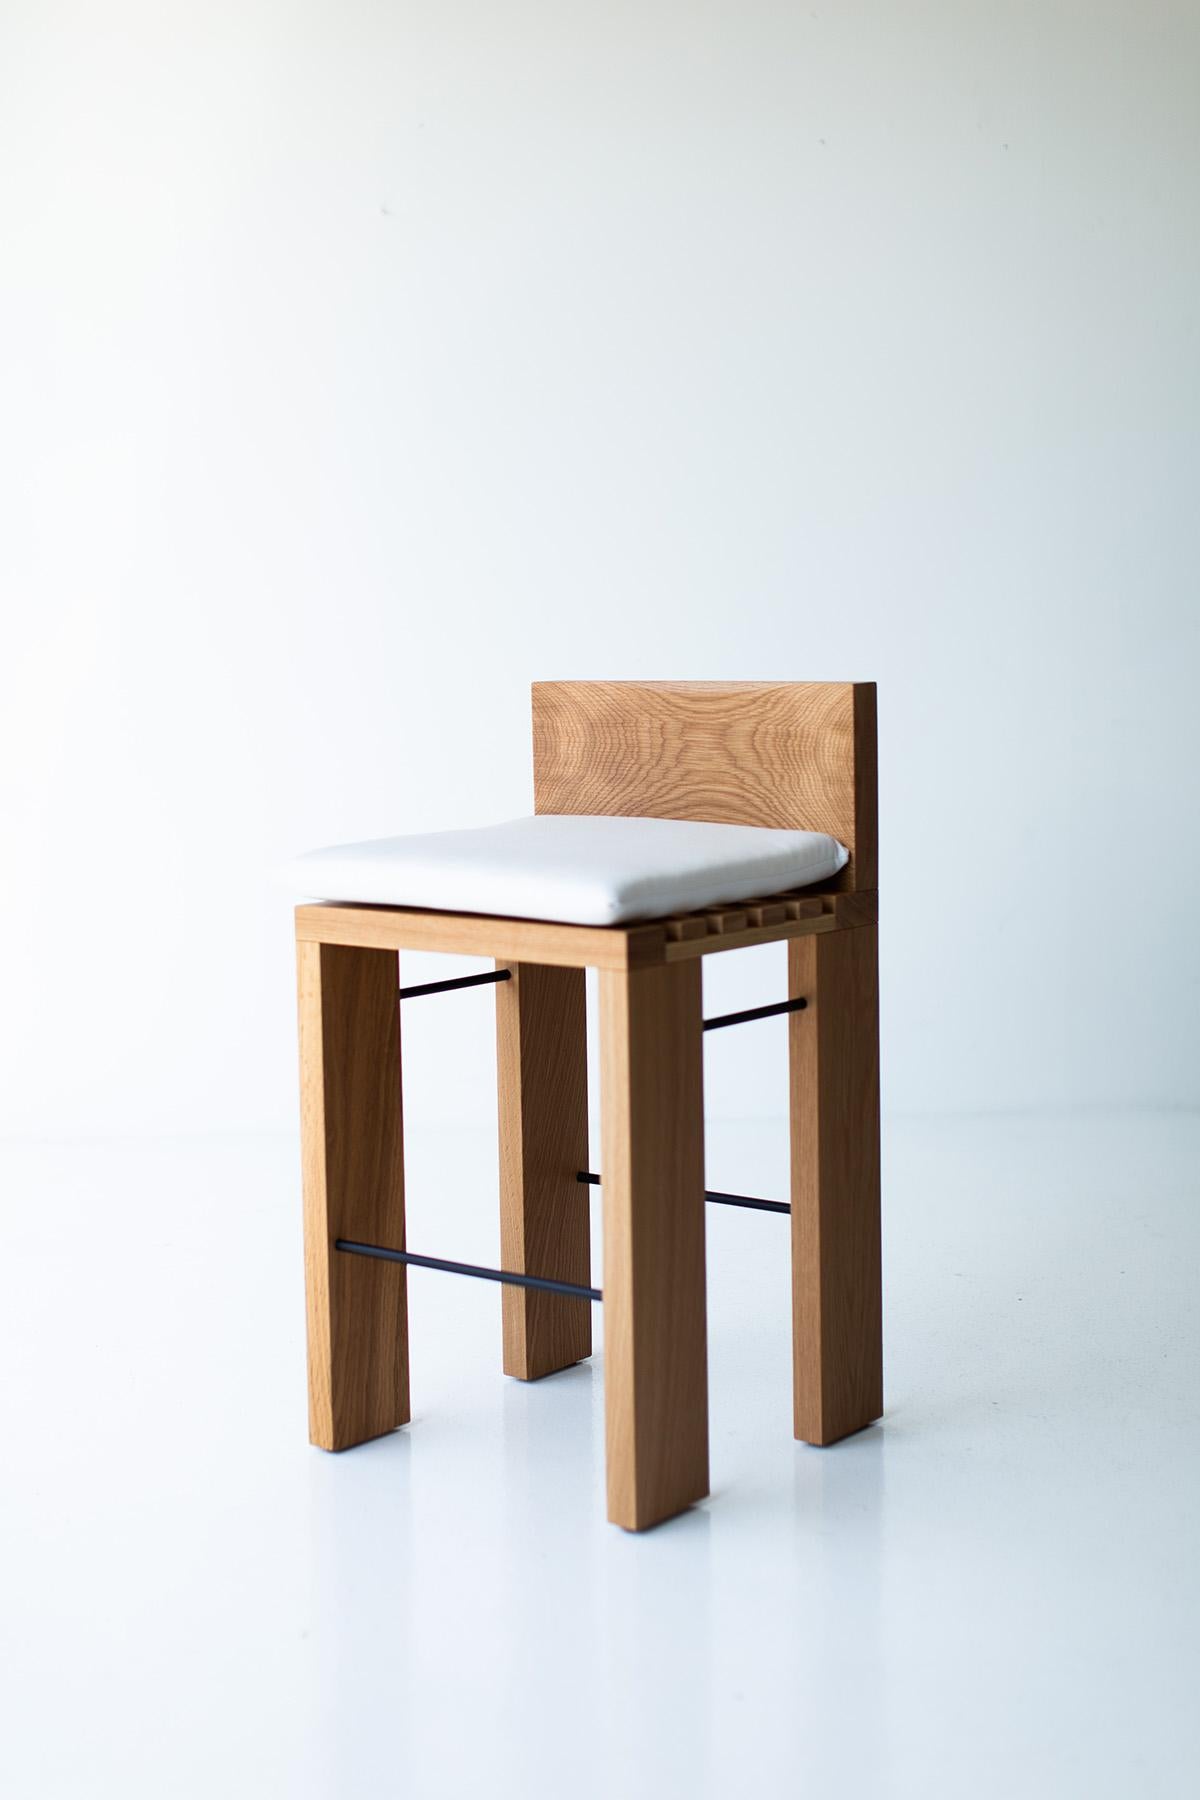 Bertu Counter Stools, White Oak Counter Stool, Chile Stool

This White Oak Chile Counter Stool is beautifully constructed from solid wood in Ohio, USA. The stool is chunky and modern with a comfortable cushion in the thick weave fabric color of your